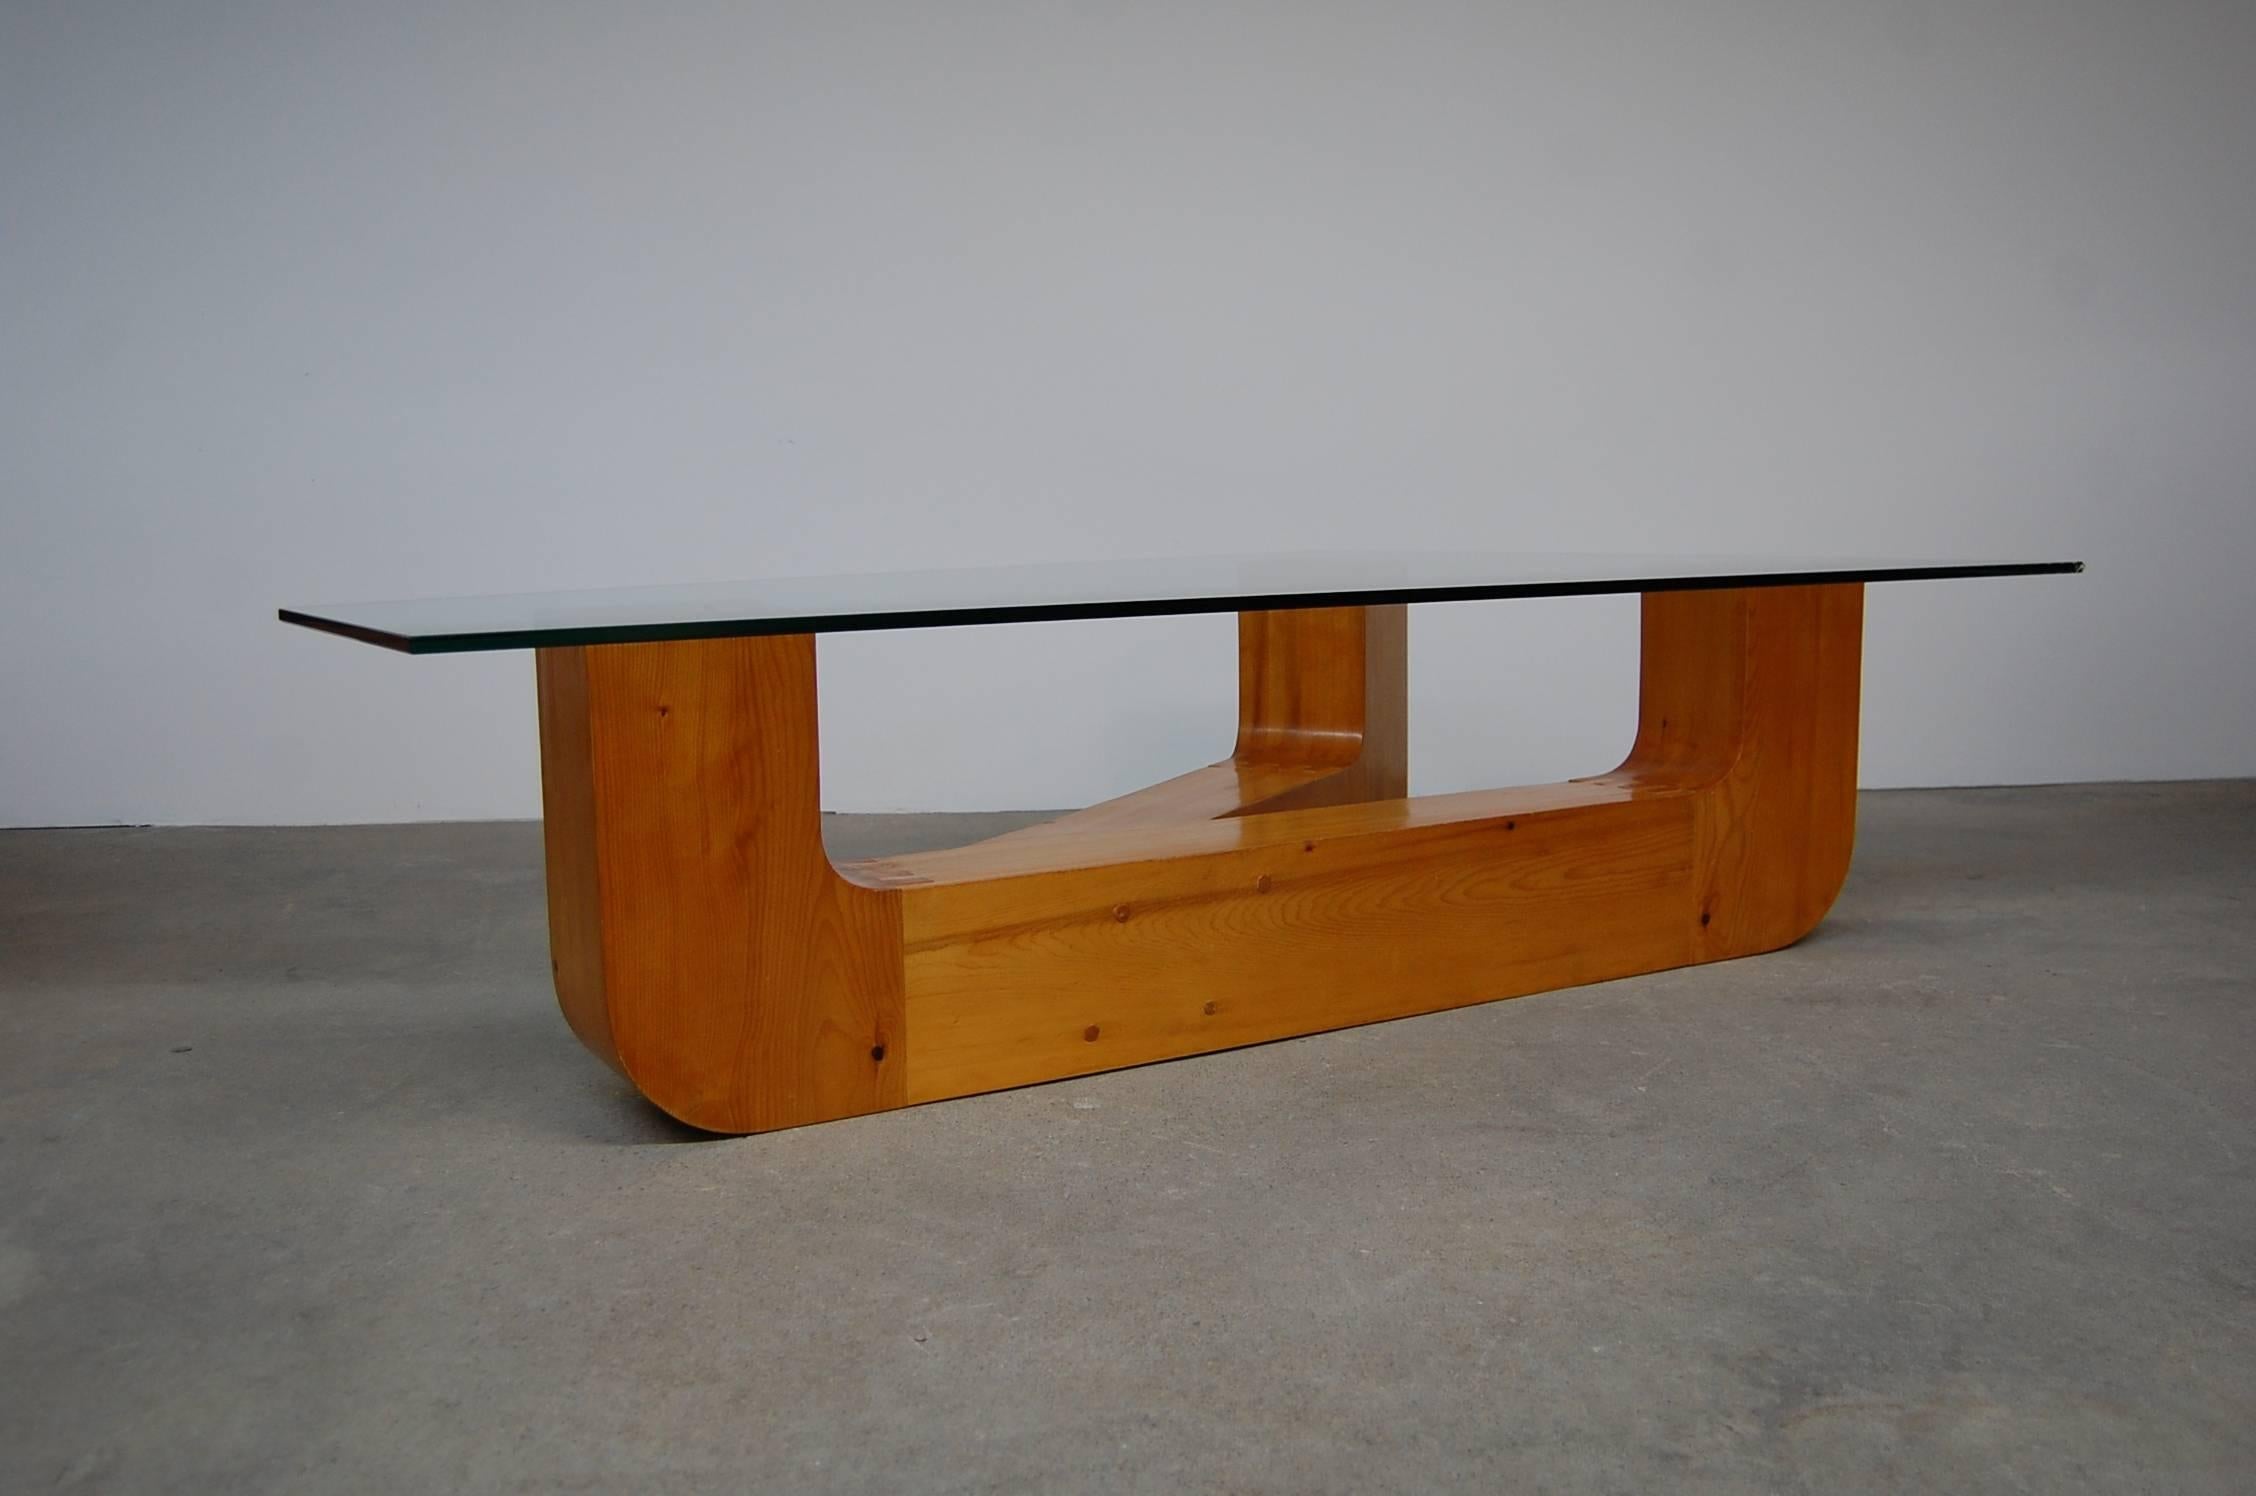 Sculptural coffee table by Jennie Lea Knight (1933-2007), circa 1960. The base is constructed of laminated southern yellow pine, and stands 16